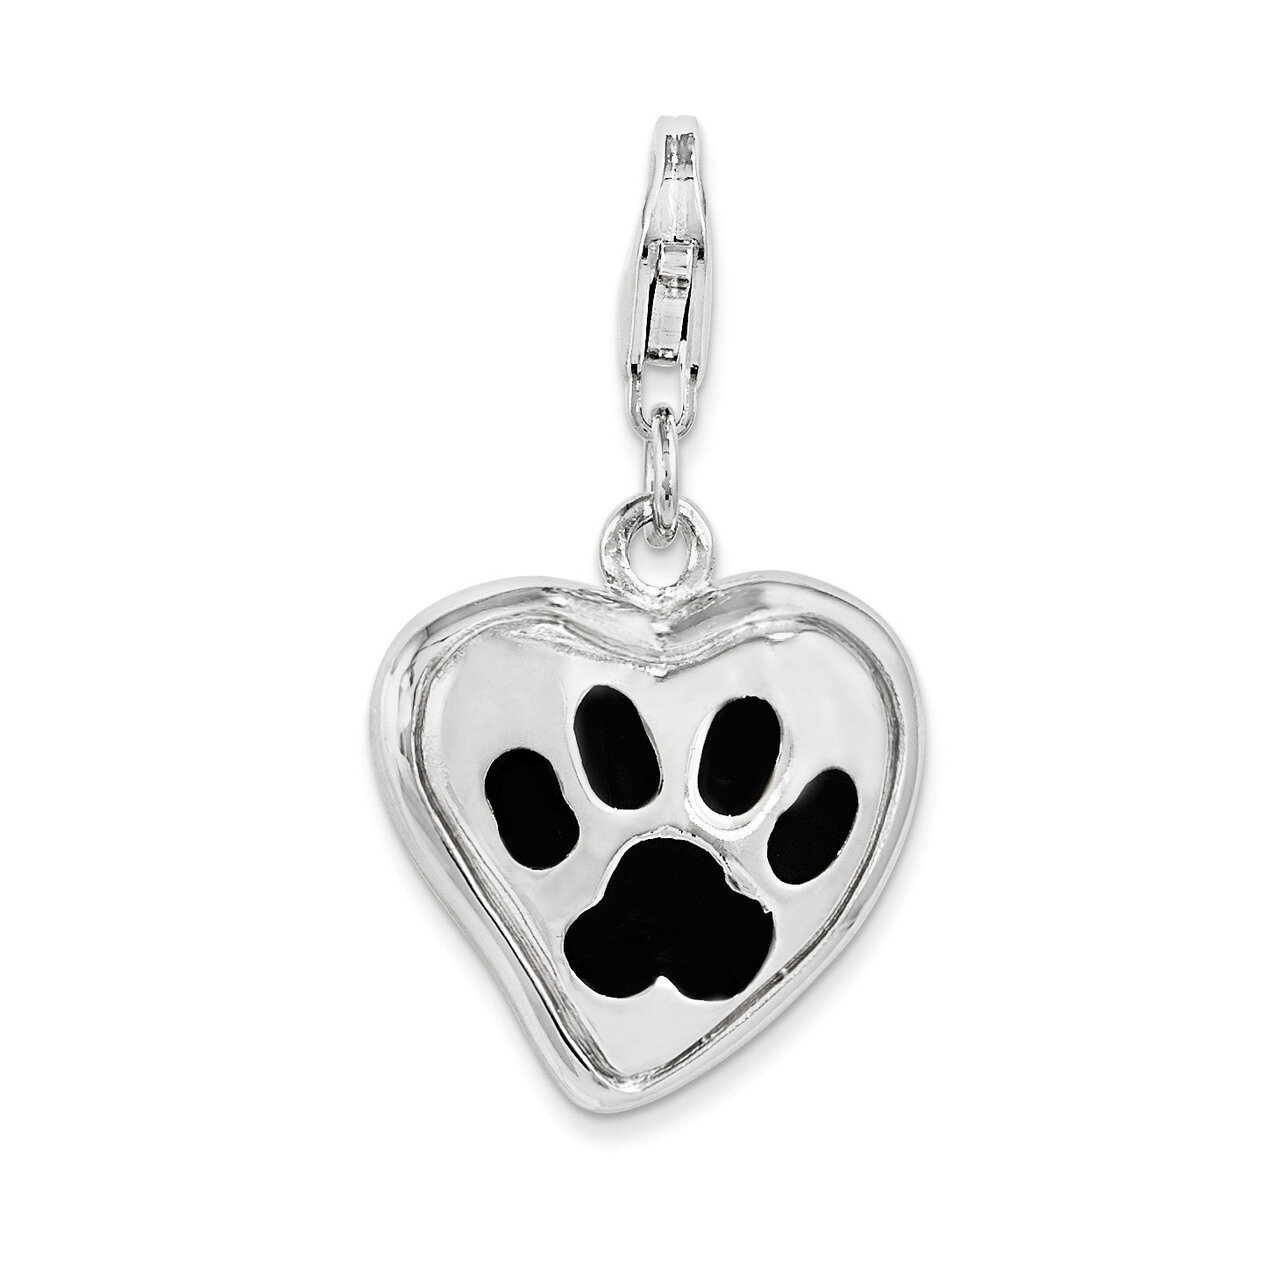 Polished and Enameled Heart With Dog Paw Print Charm Sterling Silver QCC1102